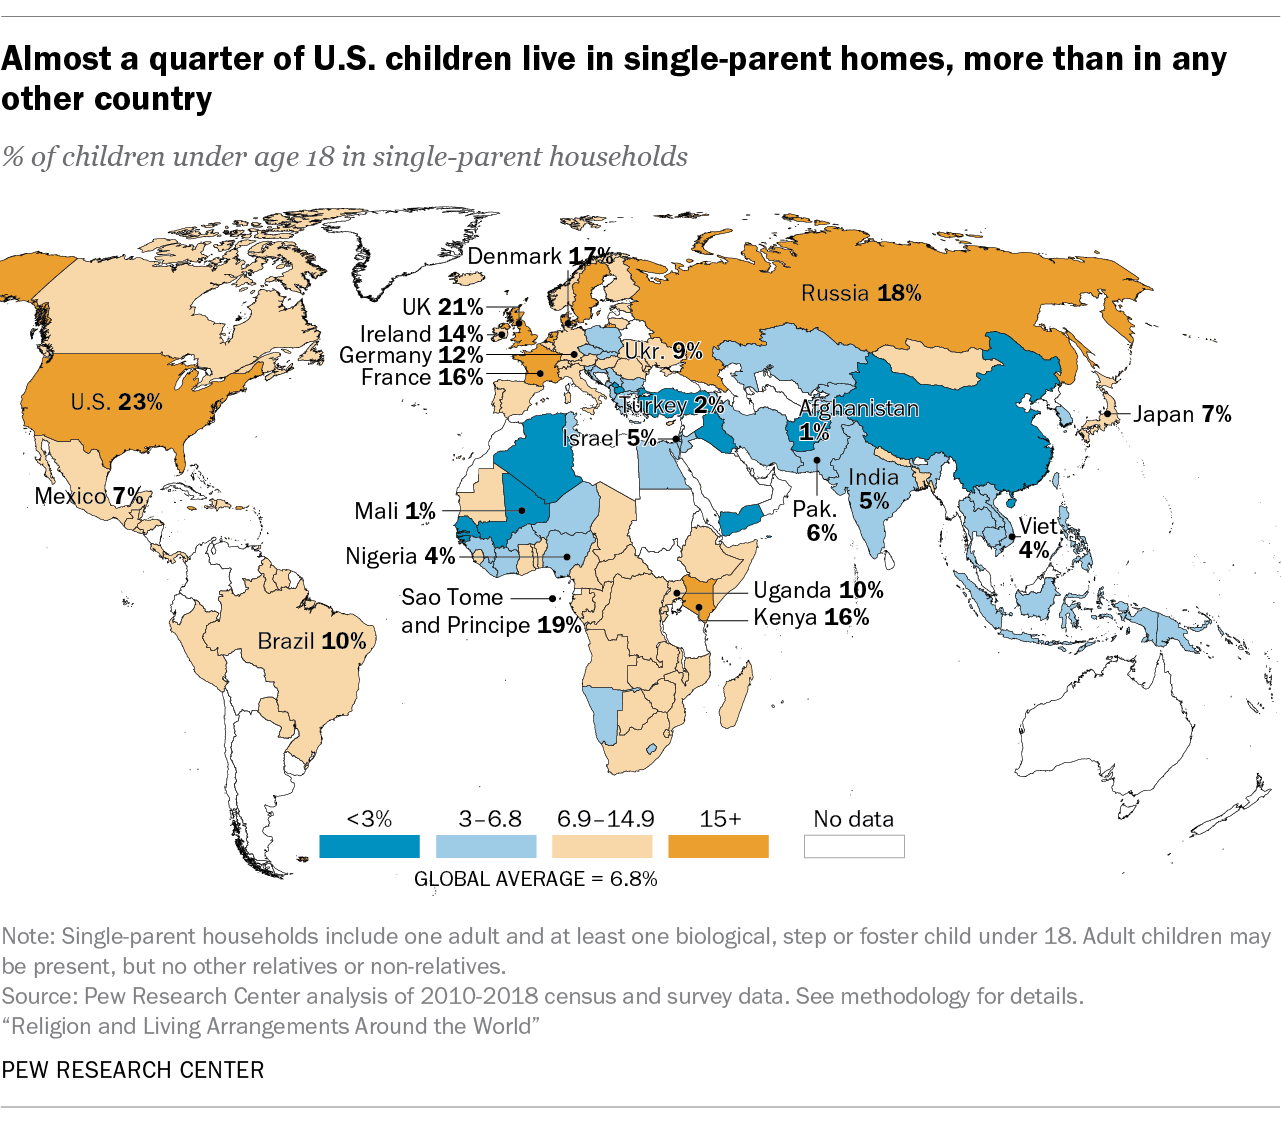 Almost a quarter of U.S. children live in single-parent homes, more than in any other country